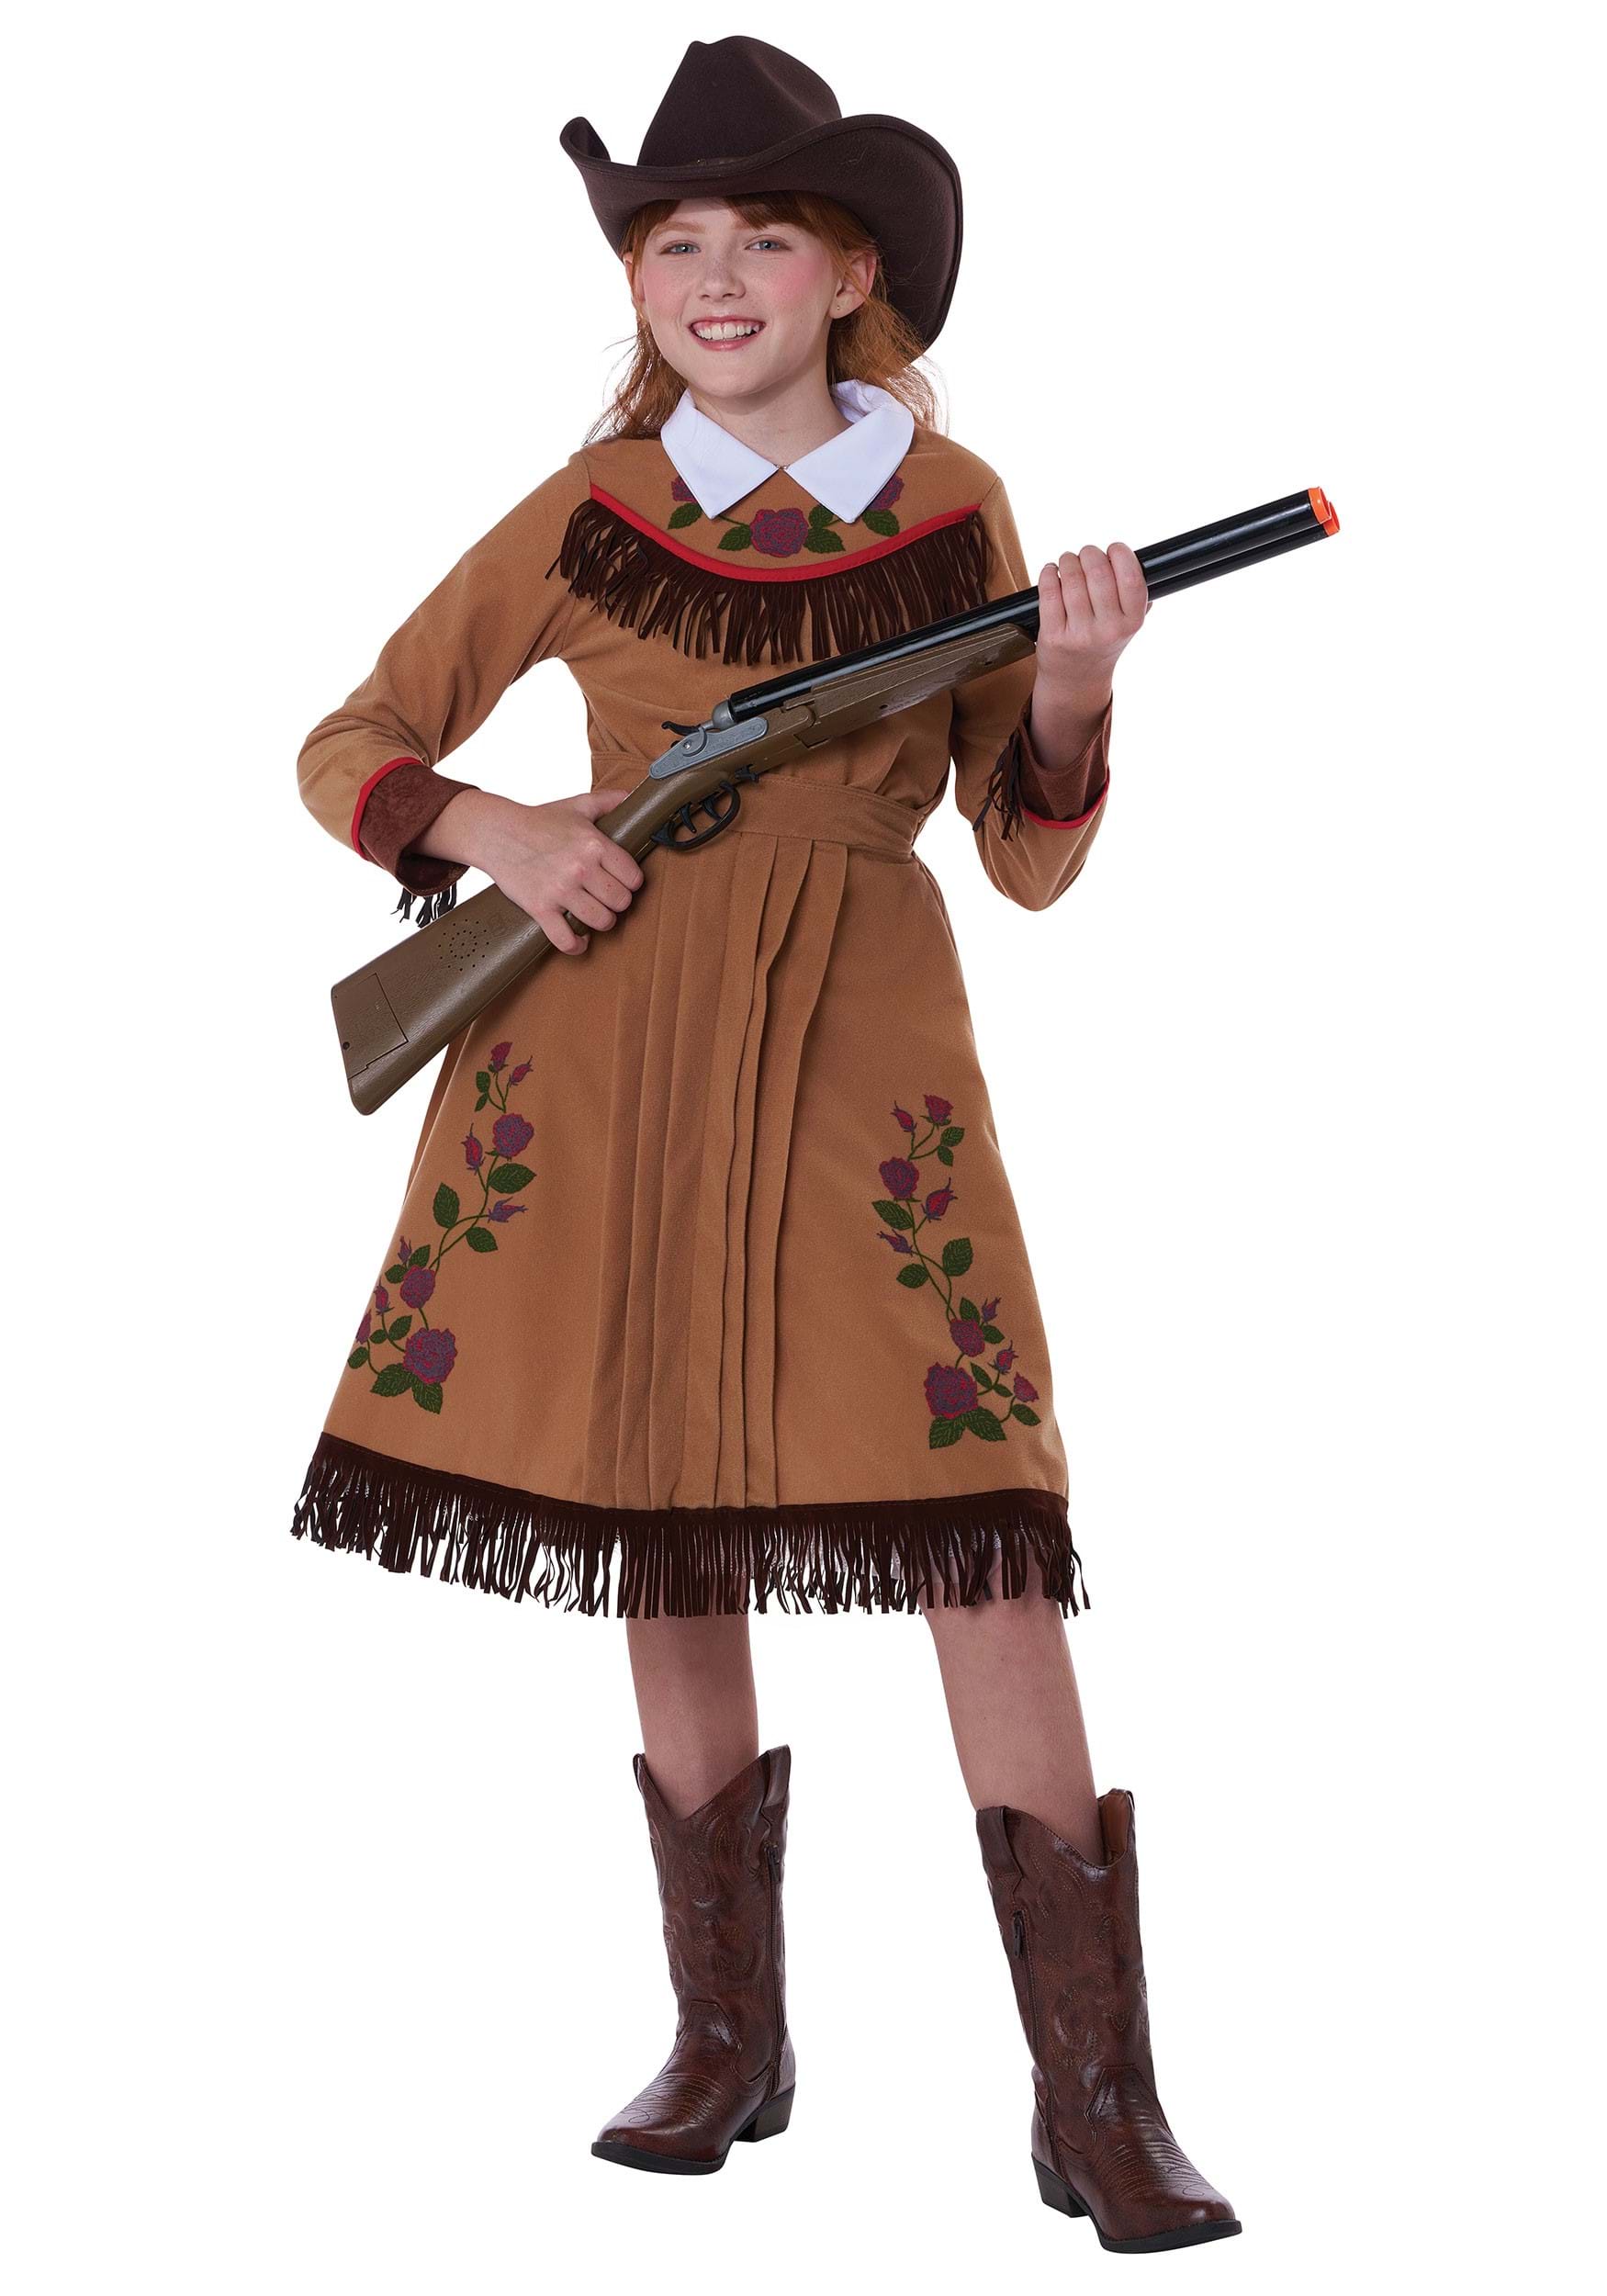 Annie Oakley Costume for Kids | Cowgirl Halloween Costumes